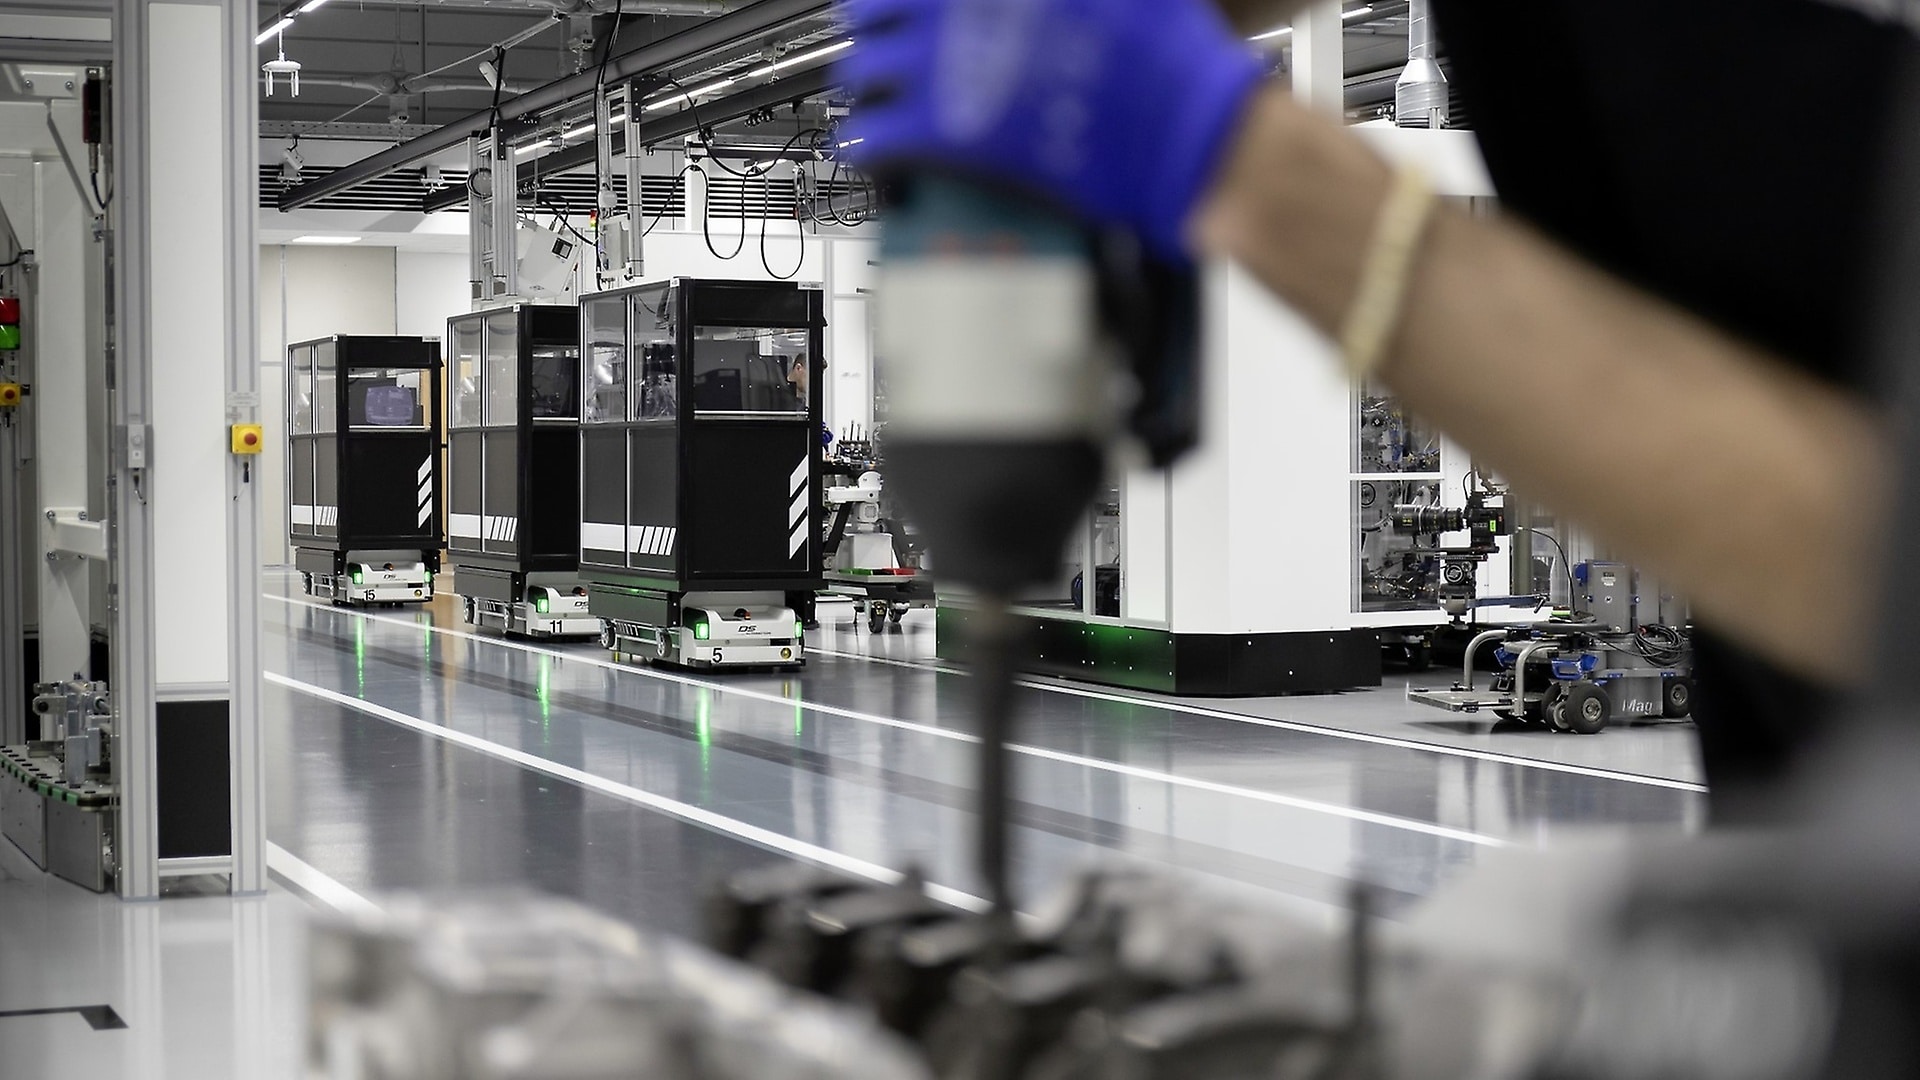 A glimpse into production at Mercedes-AMG in Affalterbach.